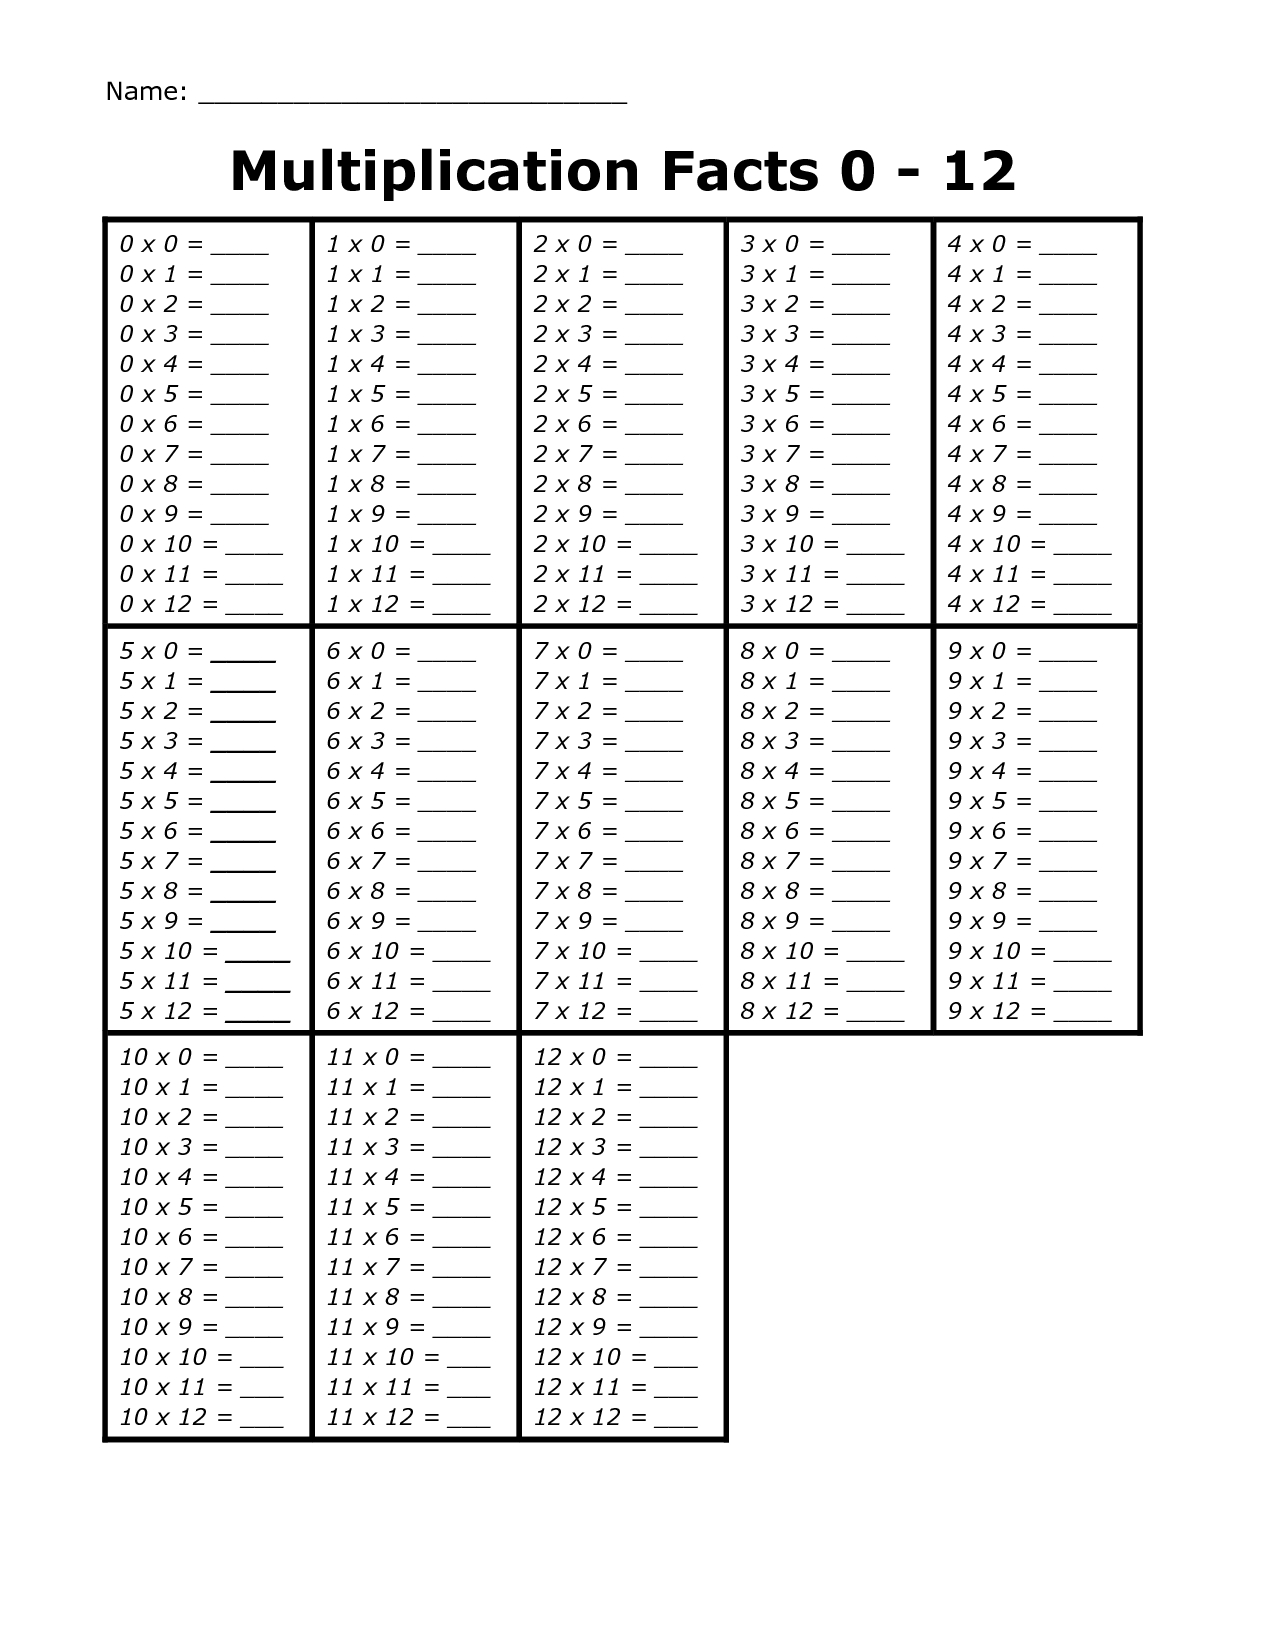 Printable Multiplication Facts 0 12 | Multiplication Facts intended for Printable Multiplication Cards 0-12